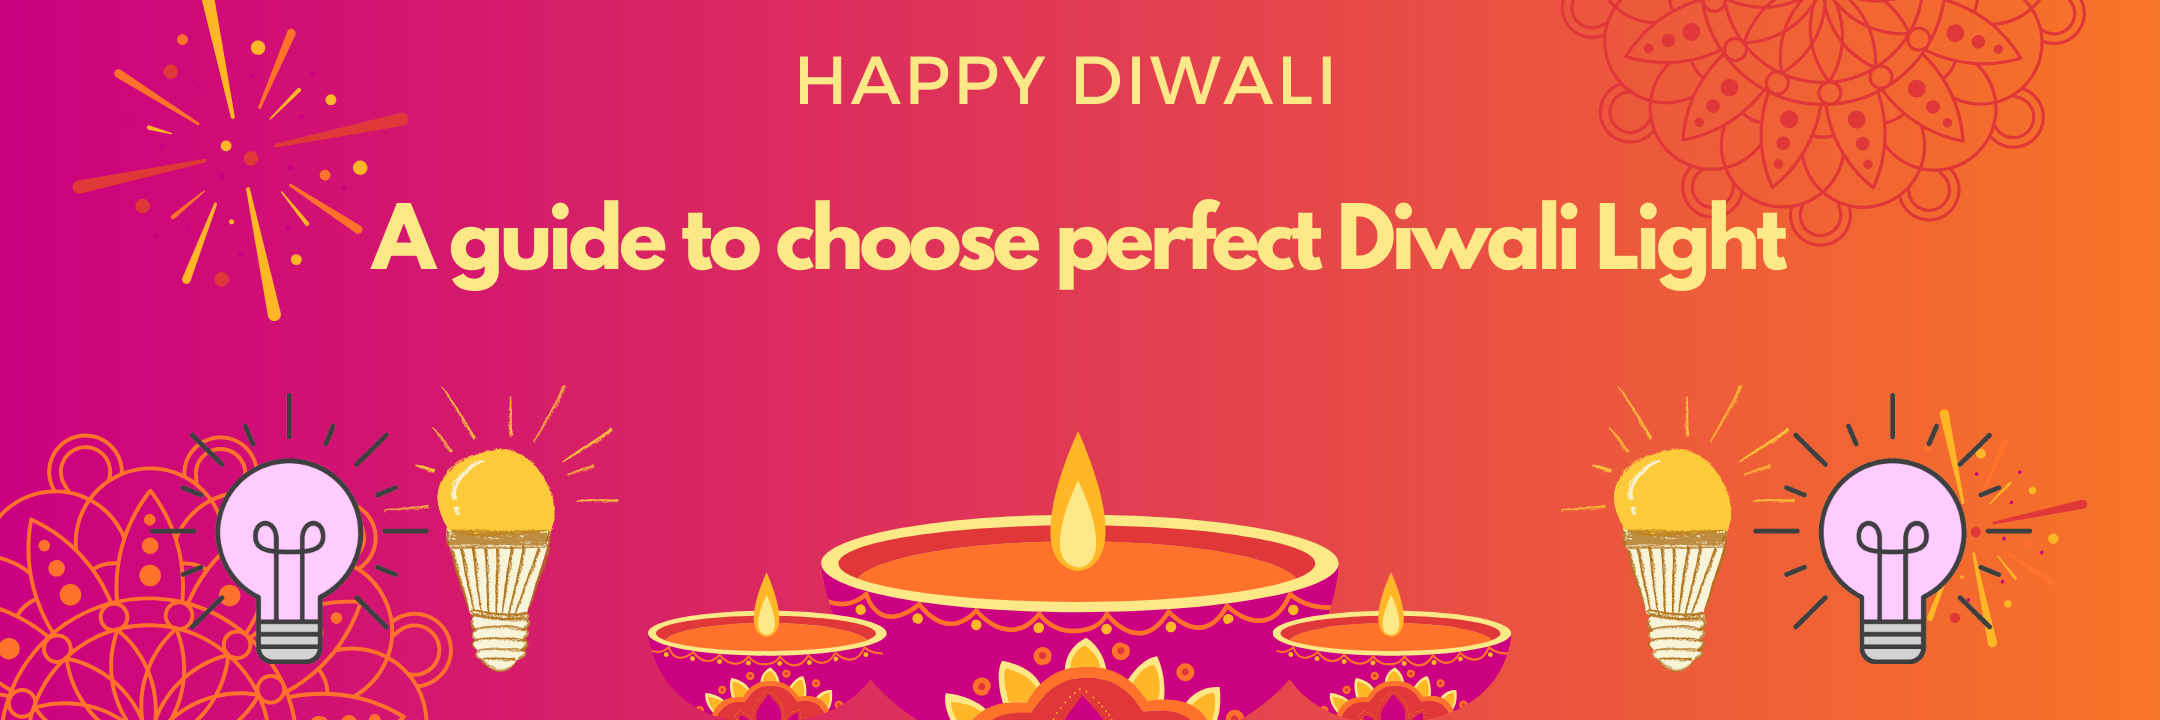 A Guide to Choosing the Perfect Diwali Lights